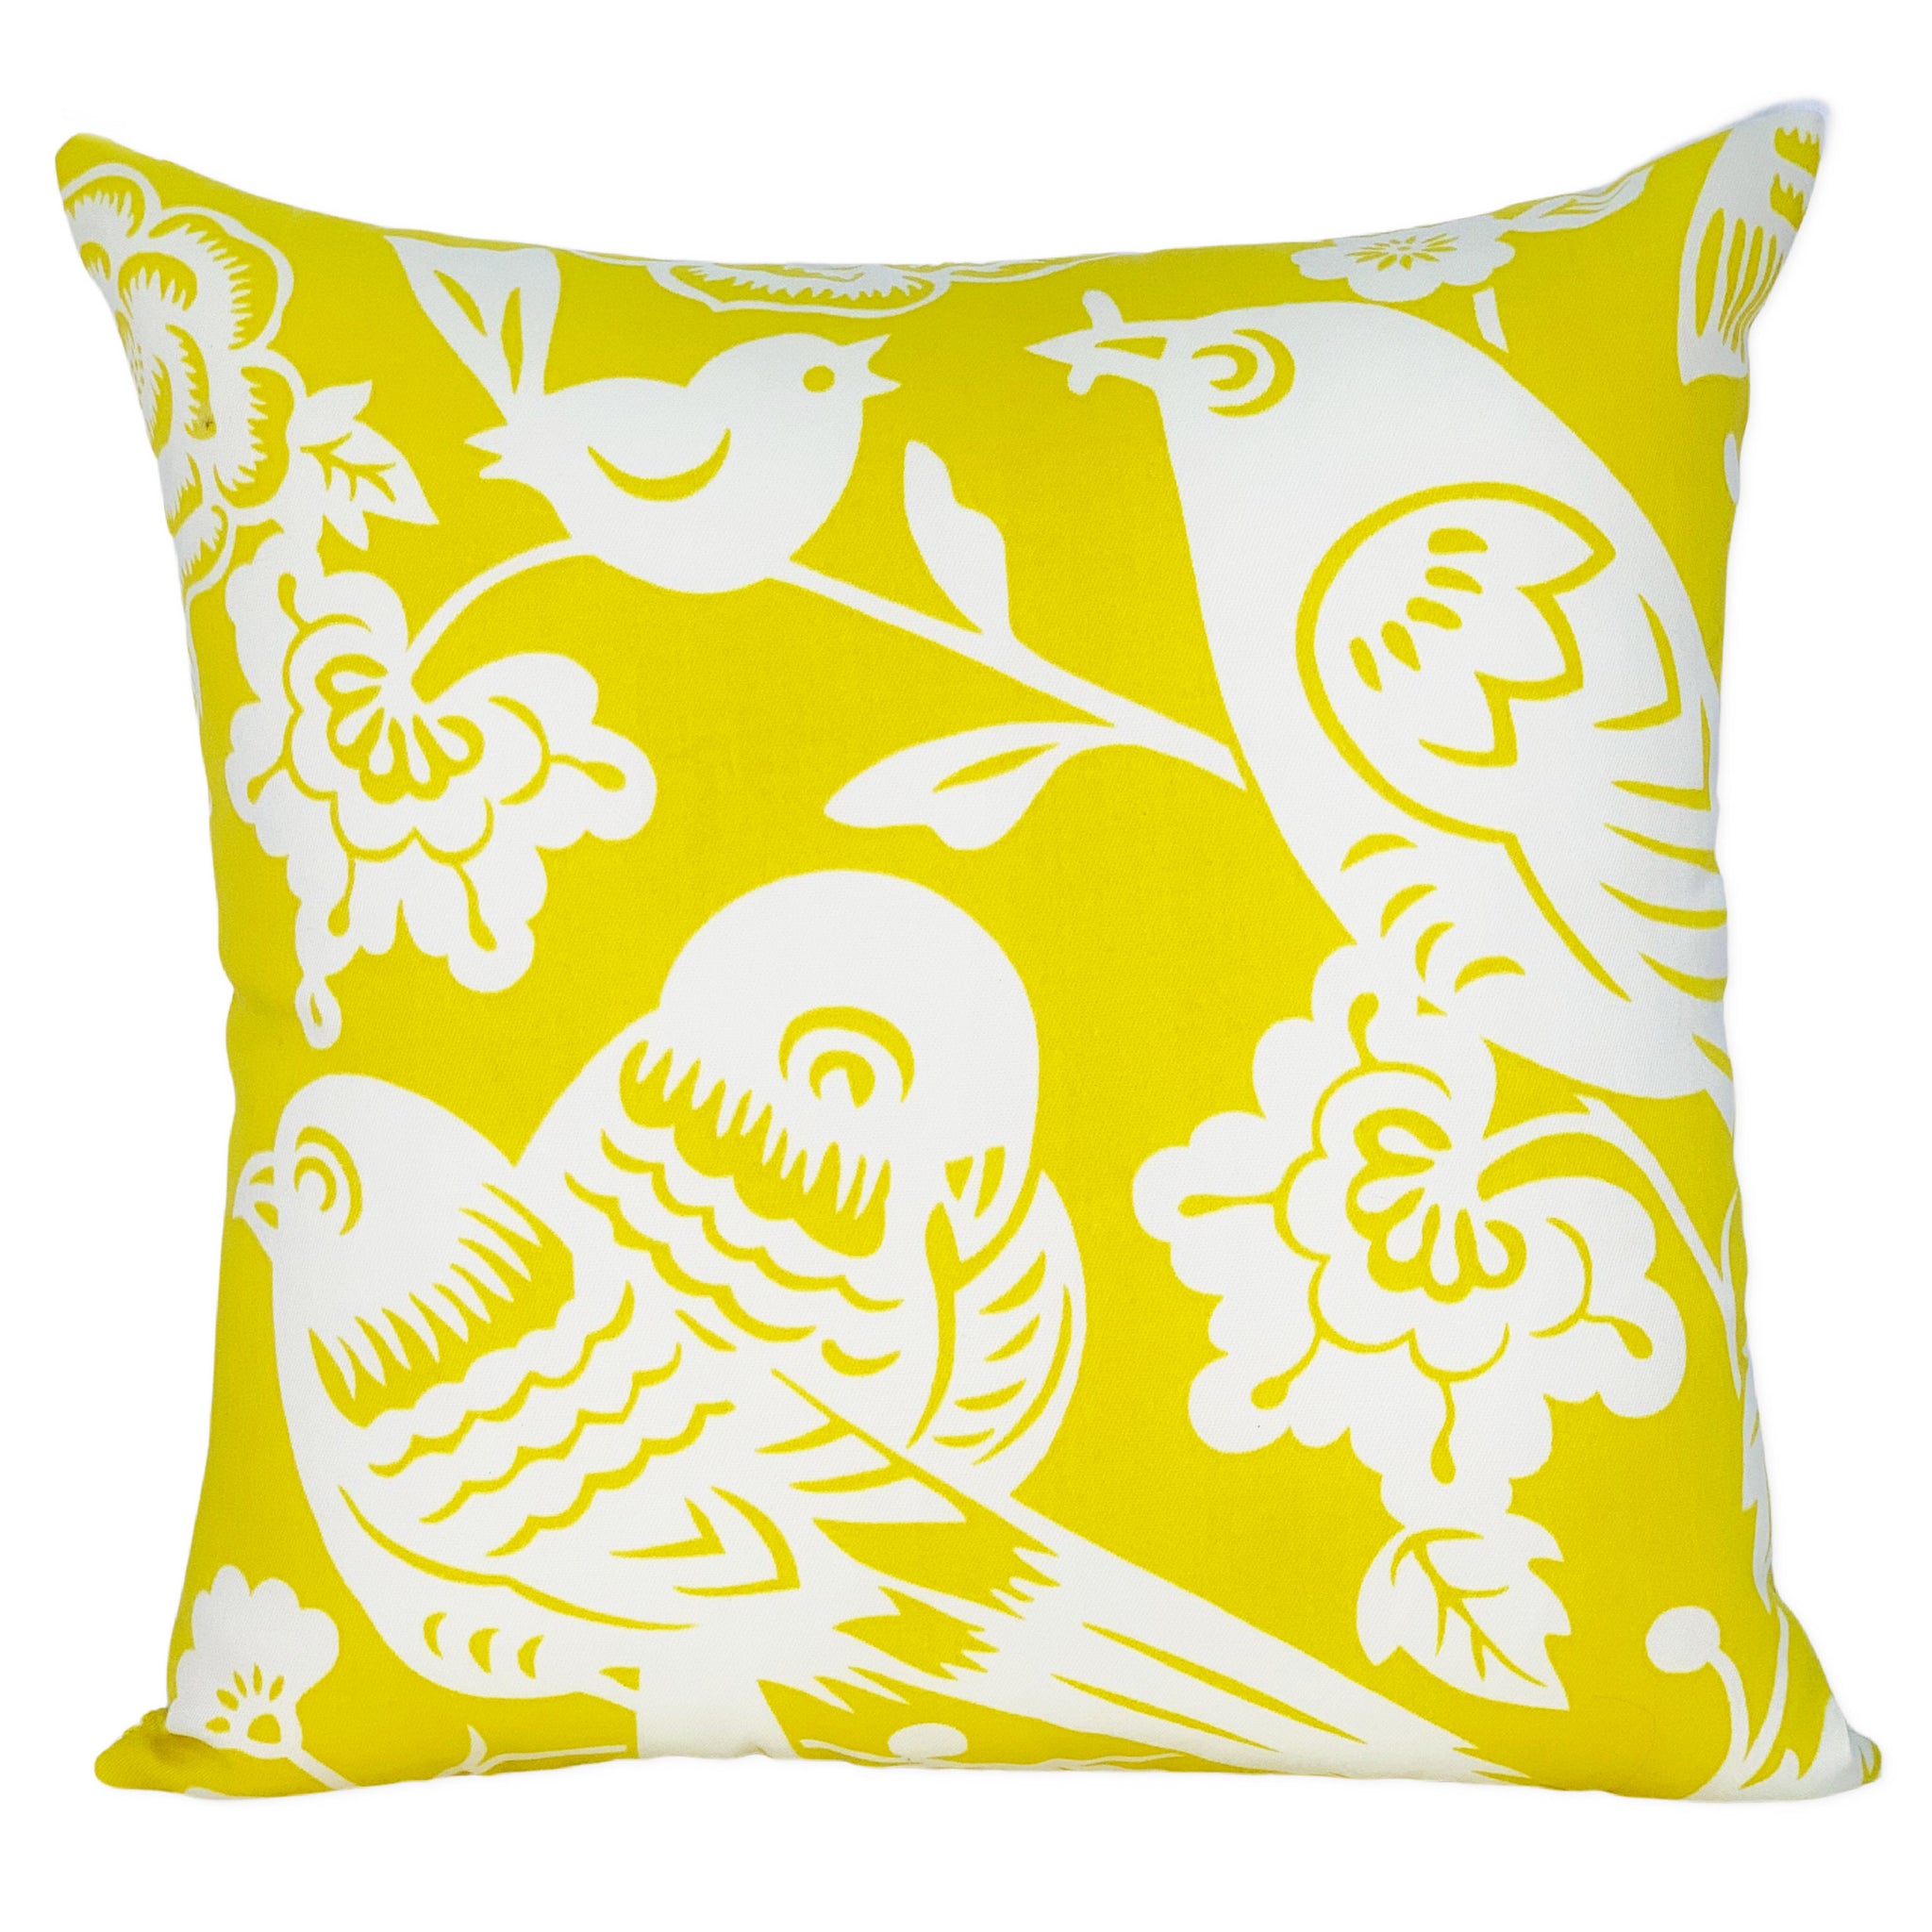 Chirp Pillow Cover in Sunflower